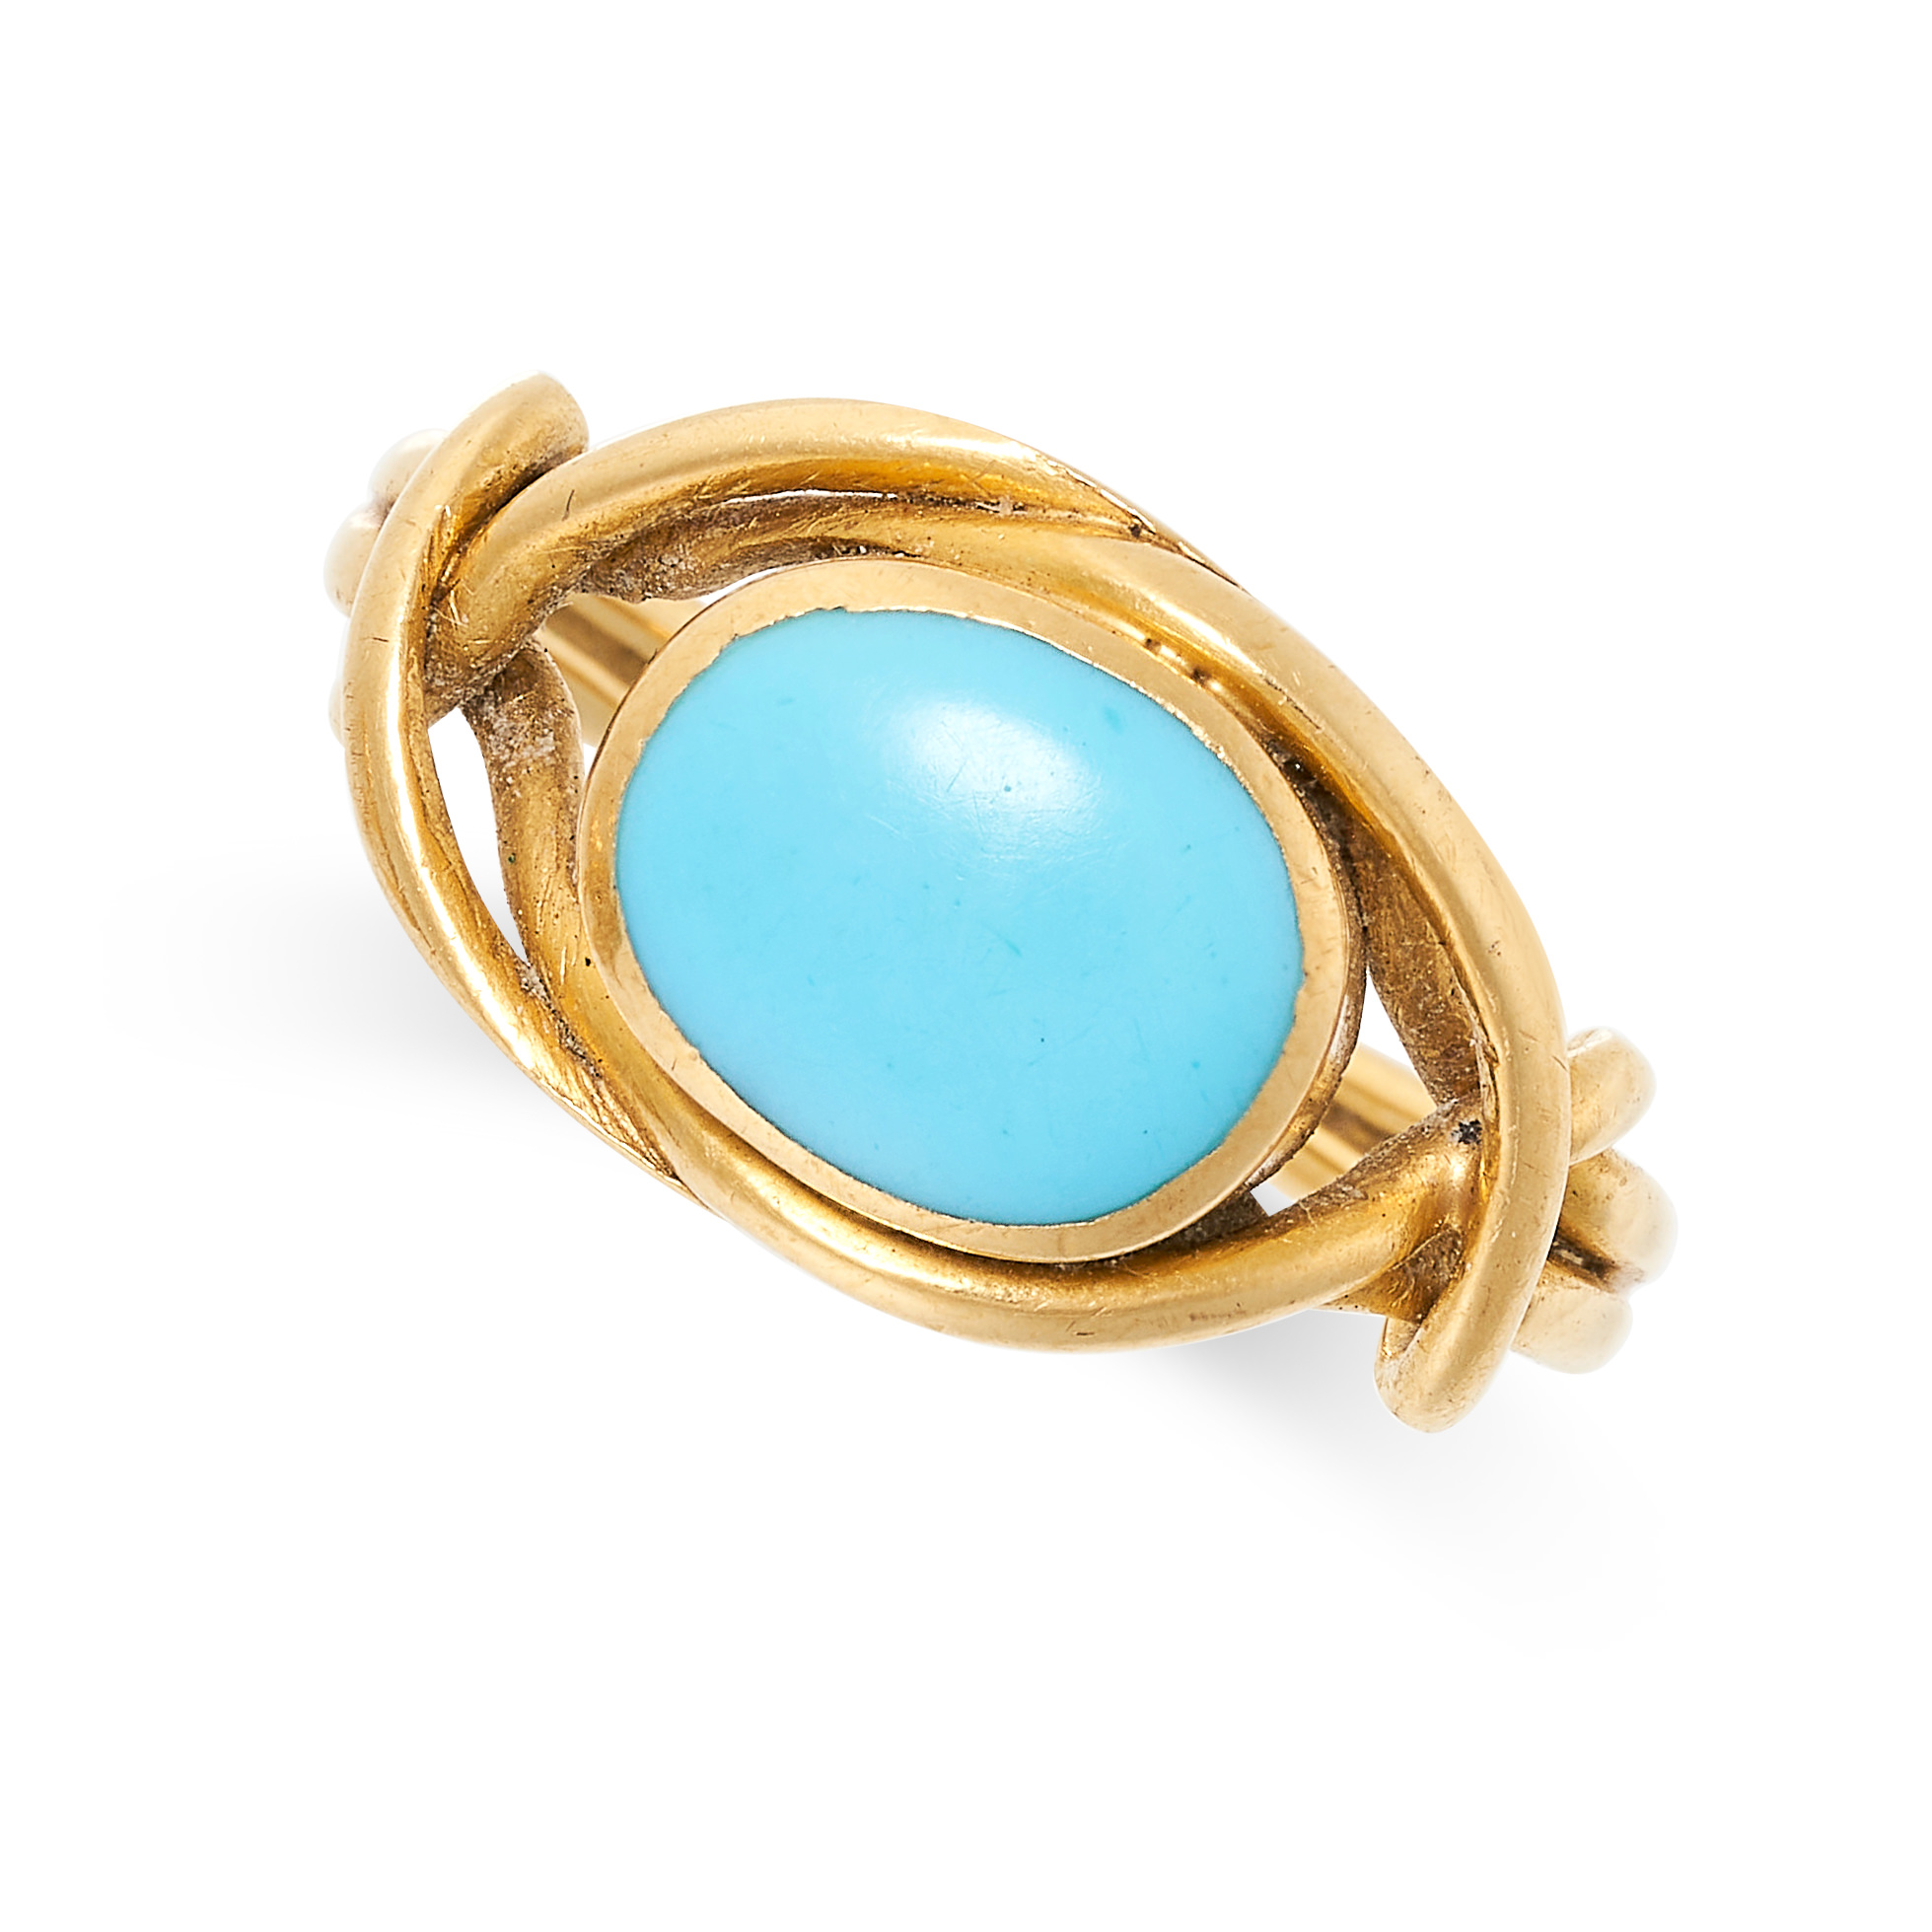 NO RESERVE - A RARE ANTIQUE VICTORIAN TURQUOISE MOURNING LOCKET RING, 19TH CENTURY in yellow gold,